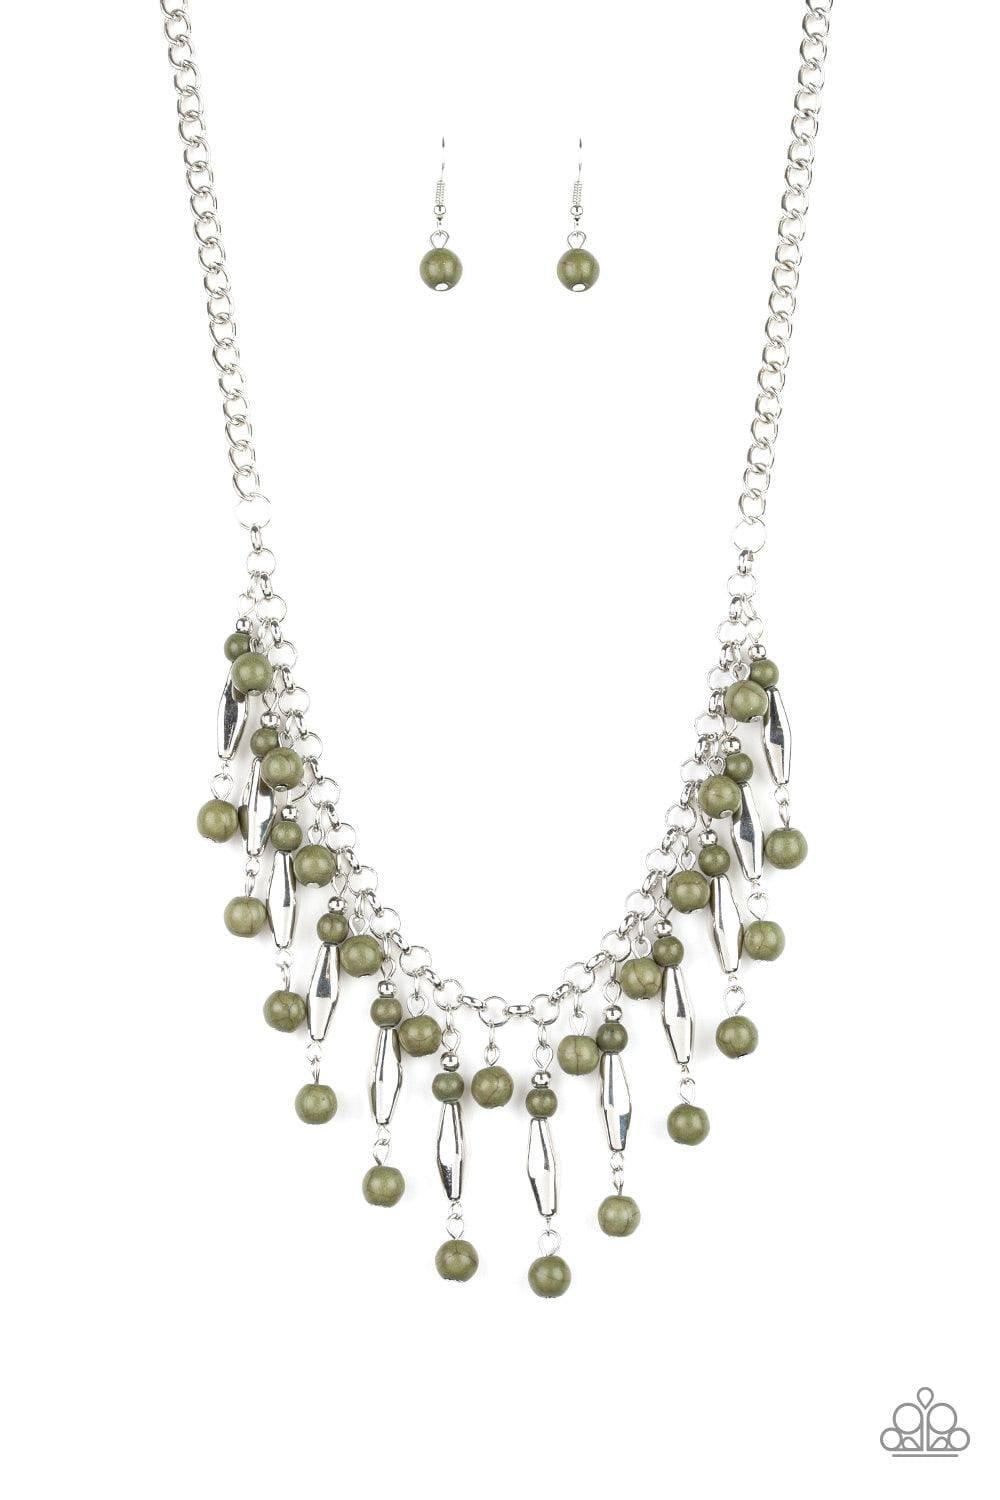 Paparazzi Accessories - Earth Conscious - Green Necklace - Bling by JessieK